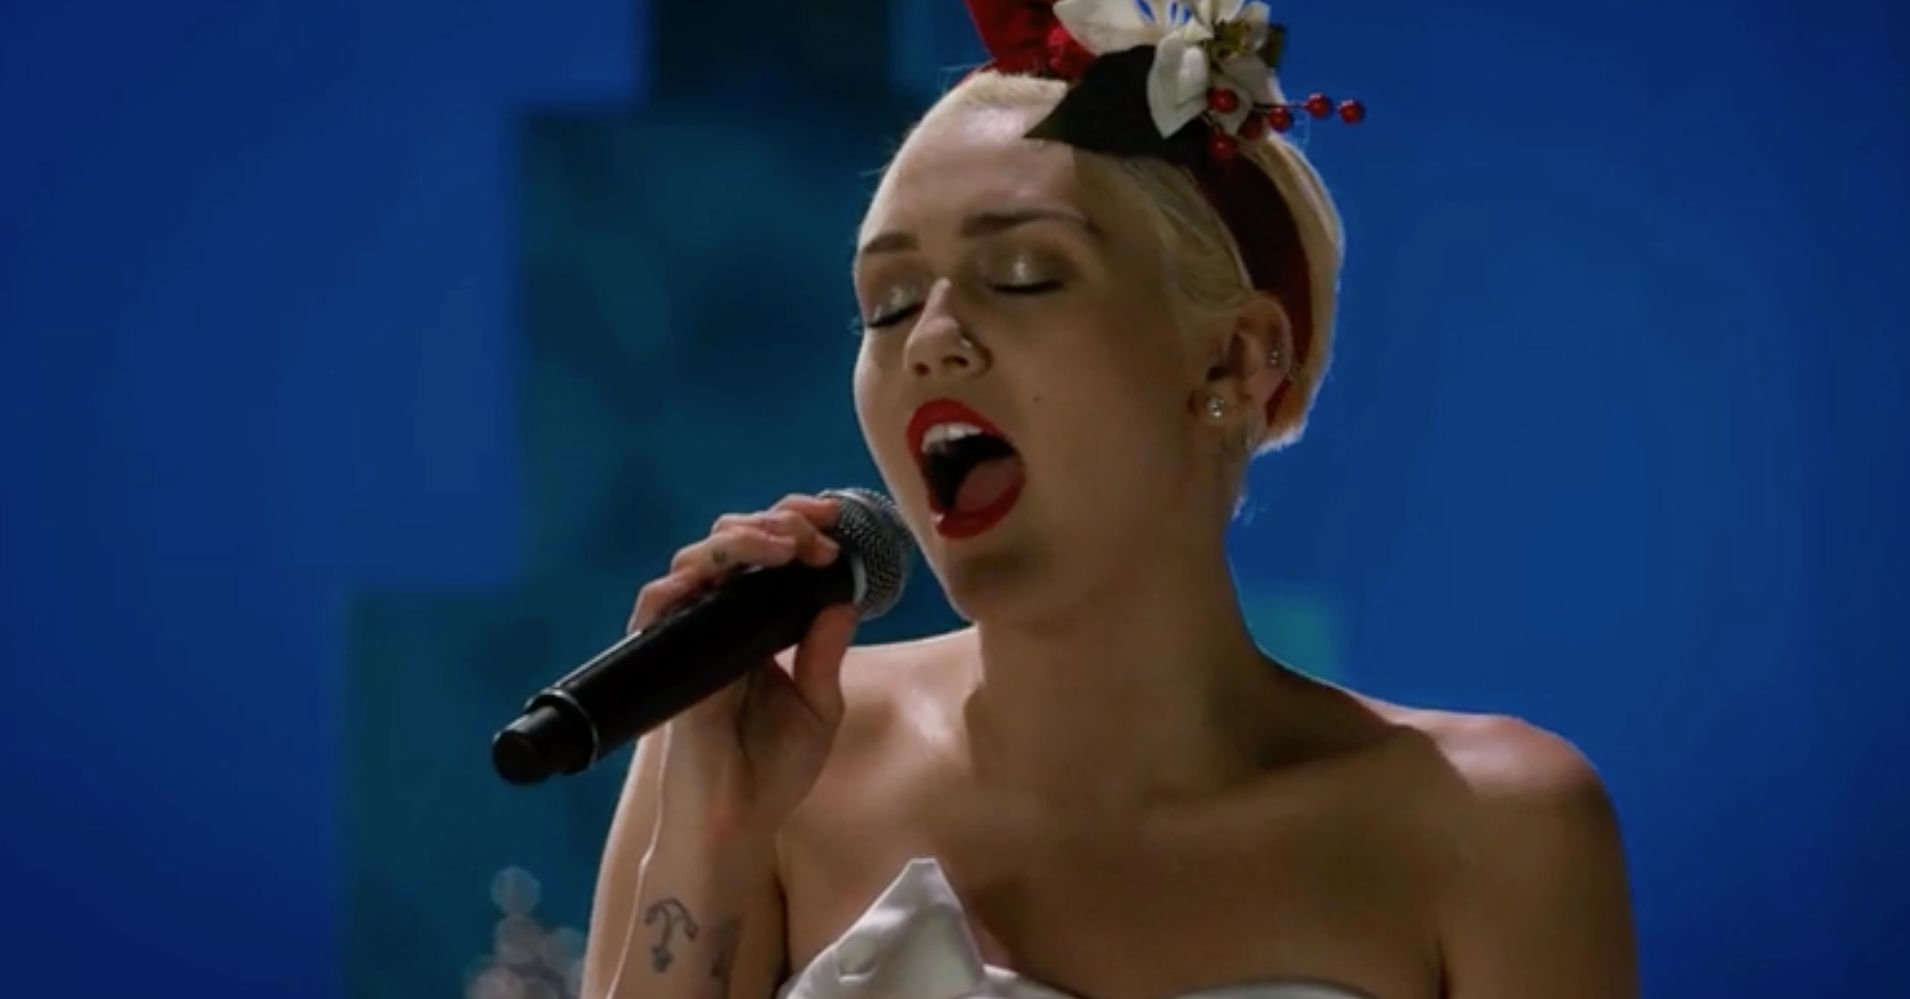 Miley Cyrus Singing Silent Night Will Fill You With Holiday Spirit 